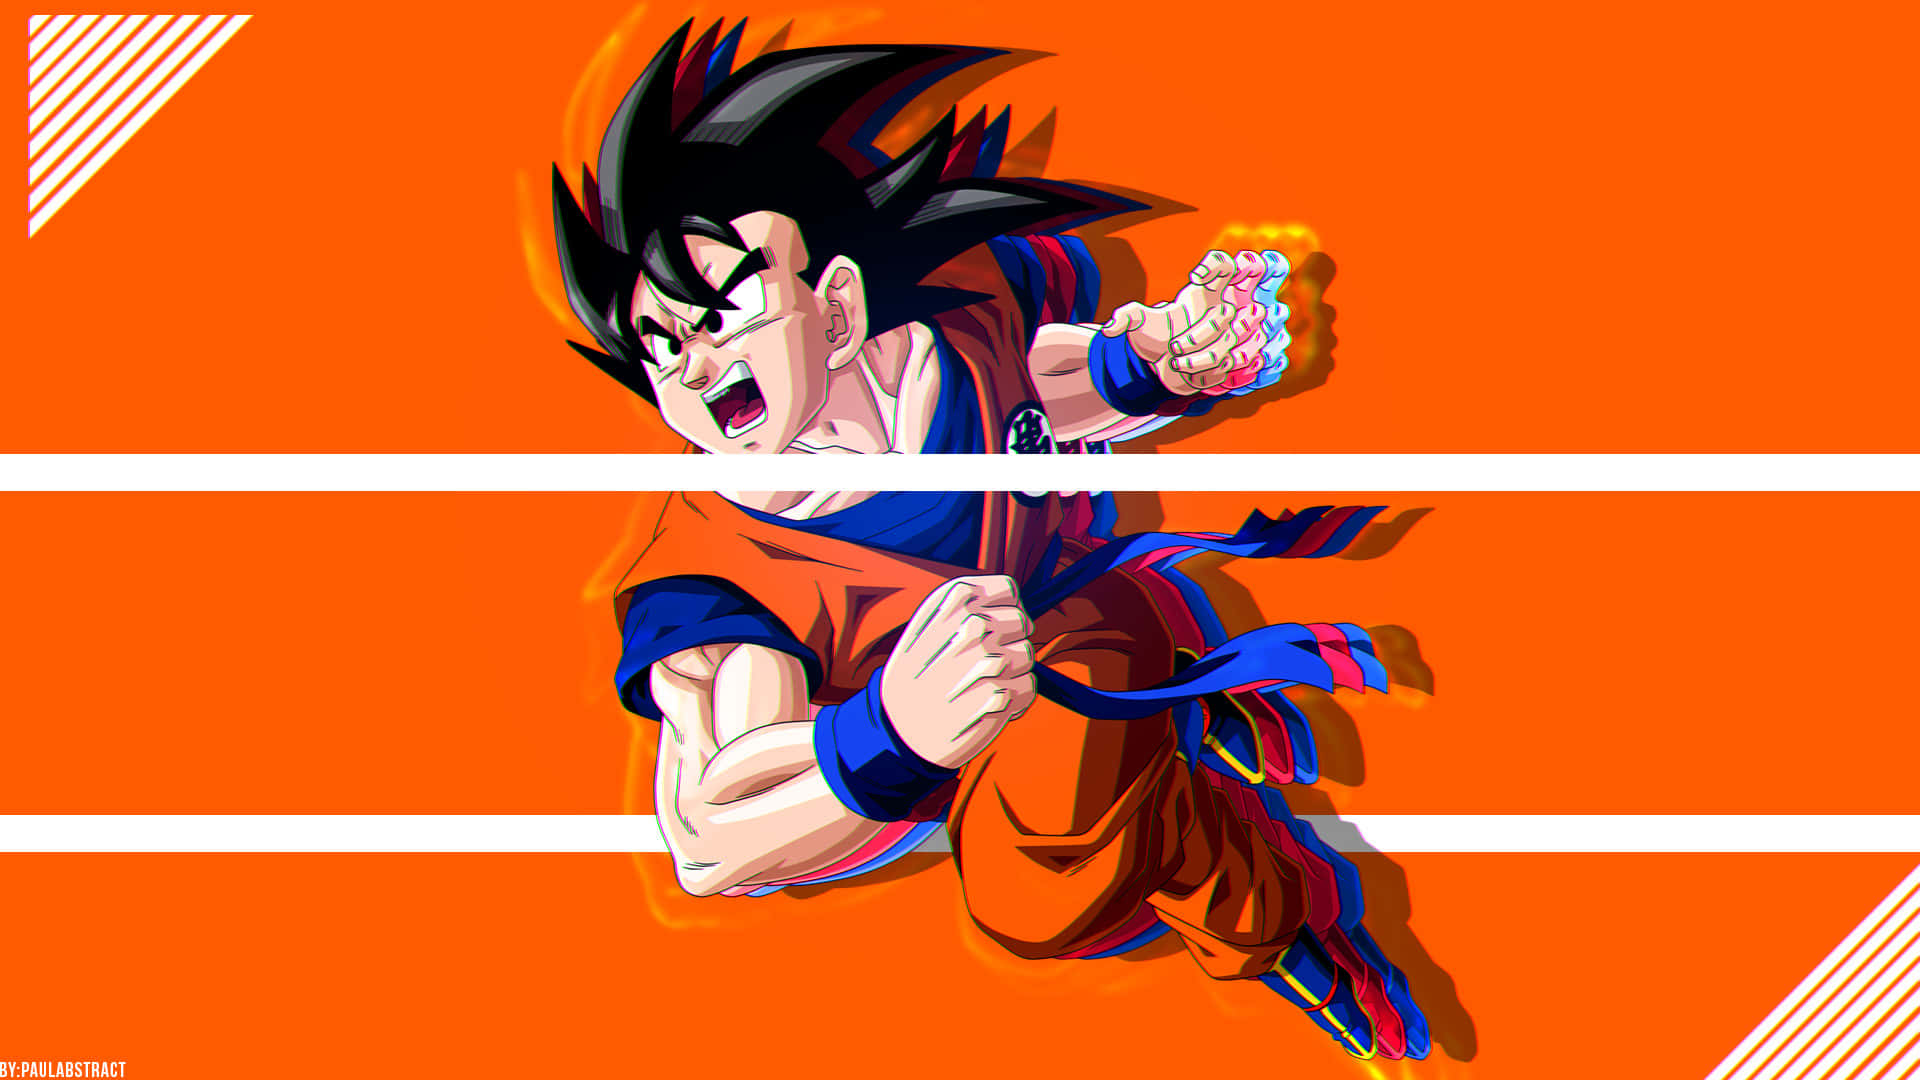 Goku is angry and ready to battle Wallpaper